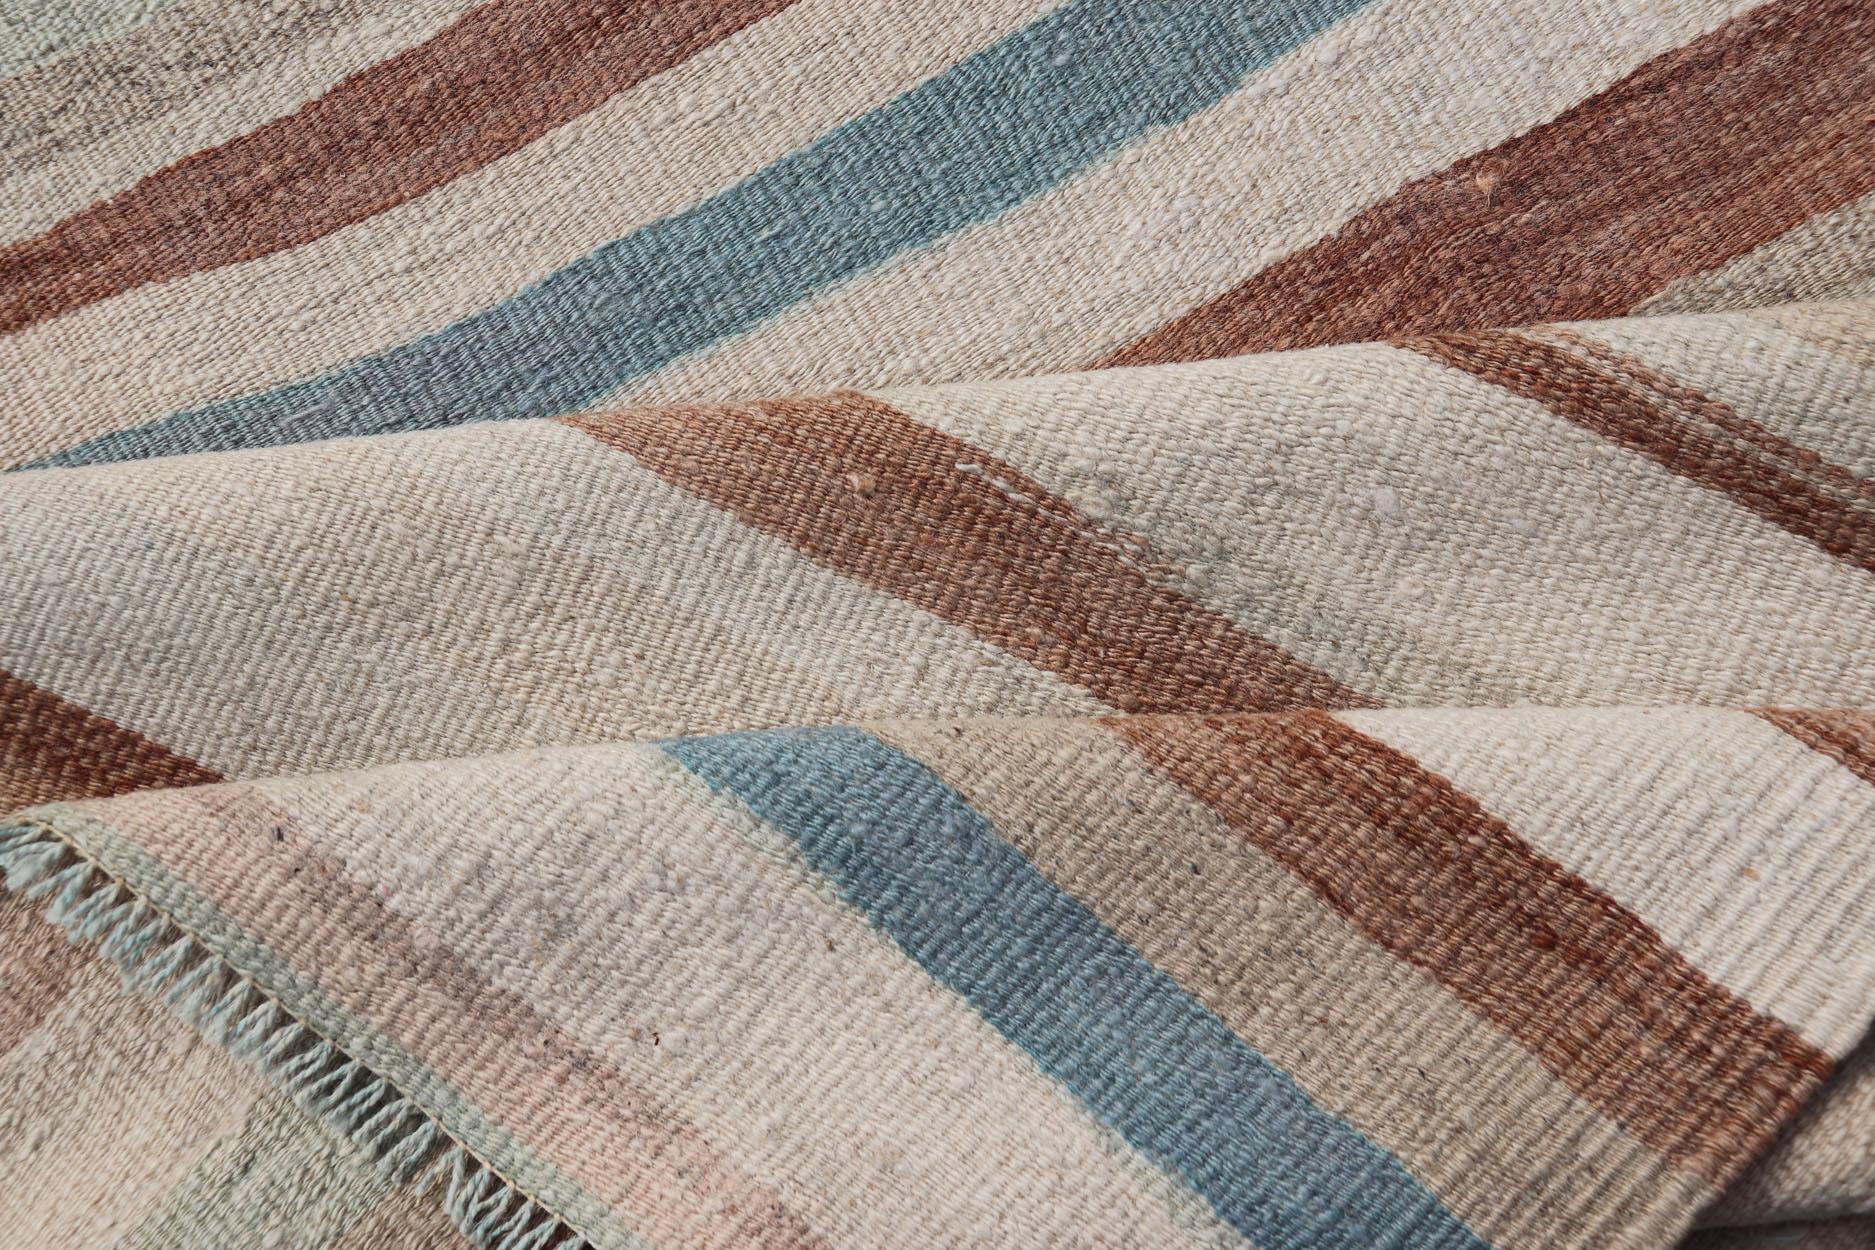 Striped Vintage Turkish Kilim Runner in Shades of Brown, Cream, and Blue For Sale 5